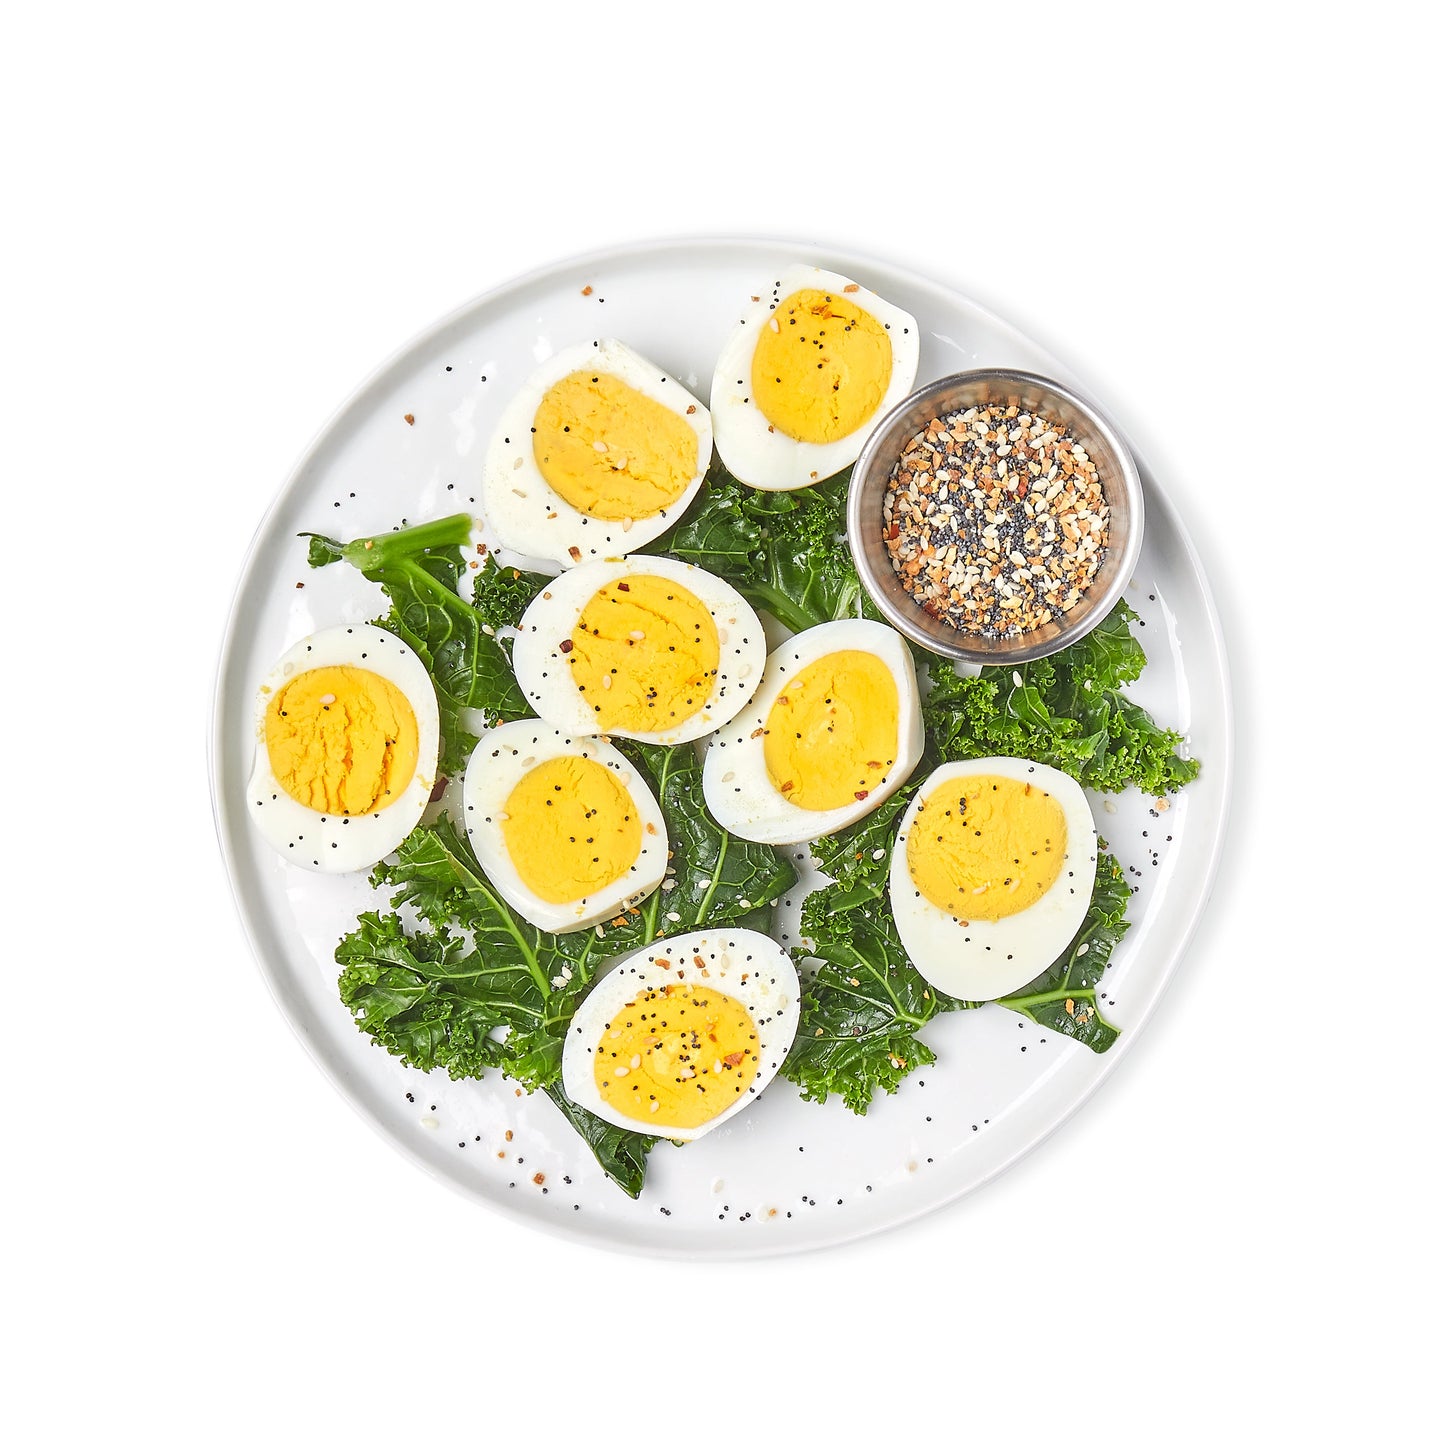 hard boiled, pasture-raised eggs azuluna foods Premium Pasture-Raised ready-to-eat Meals Delivery